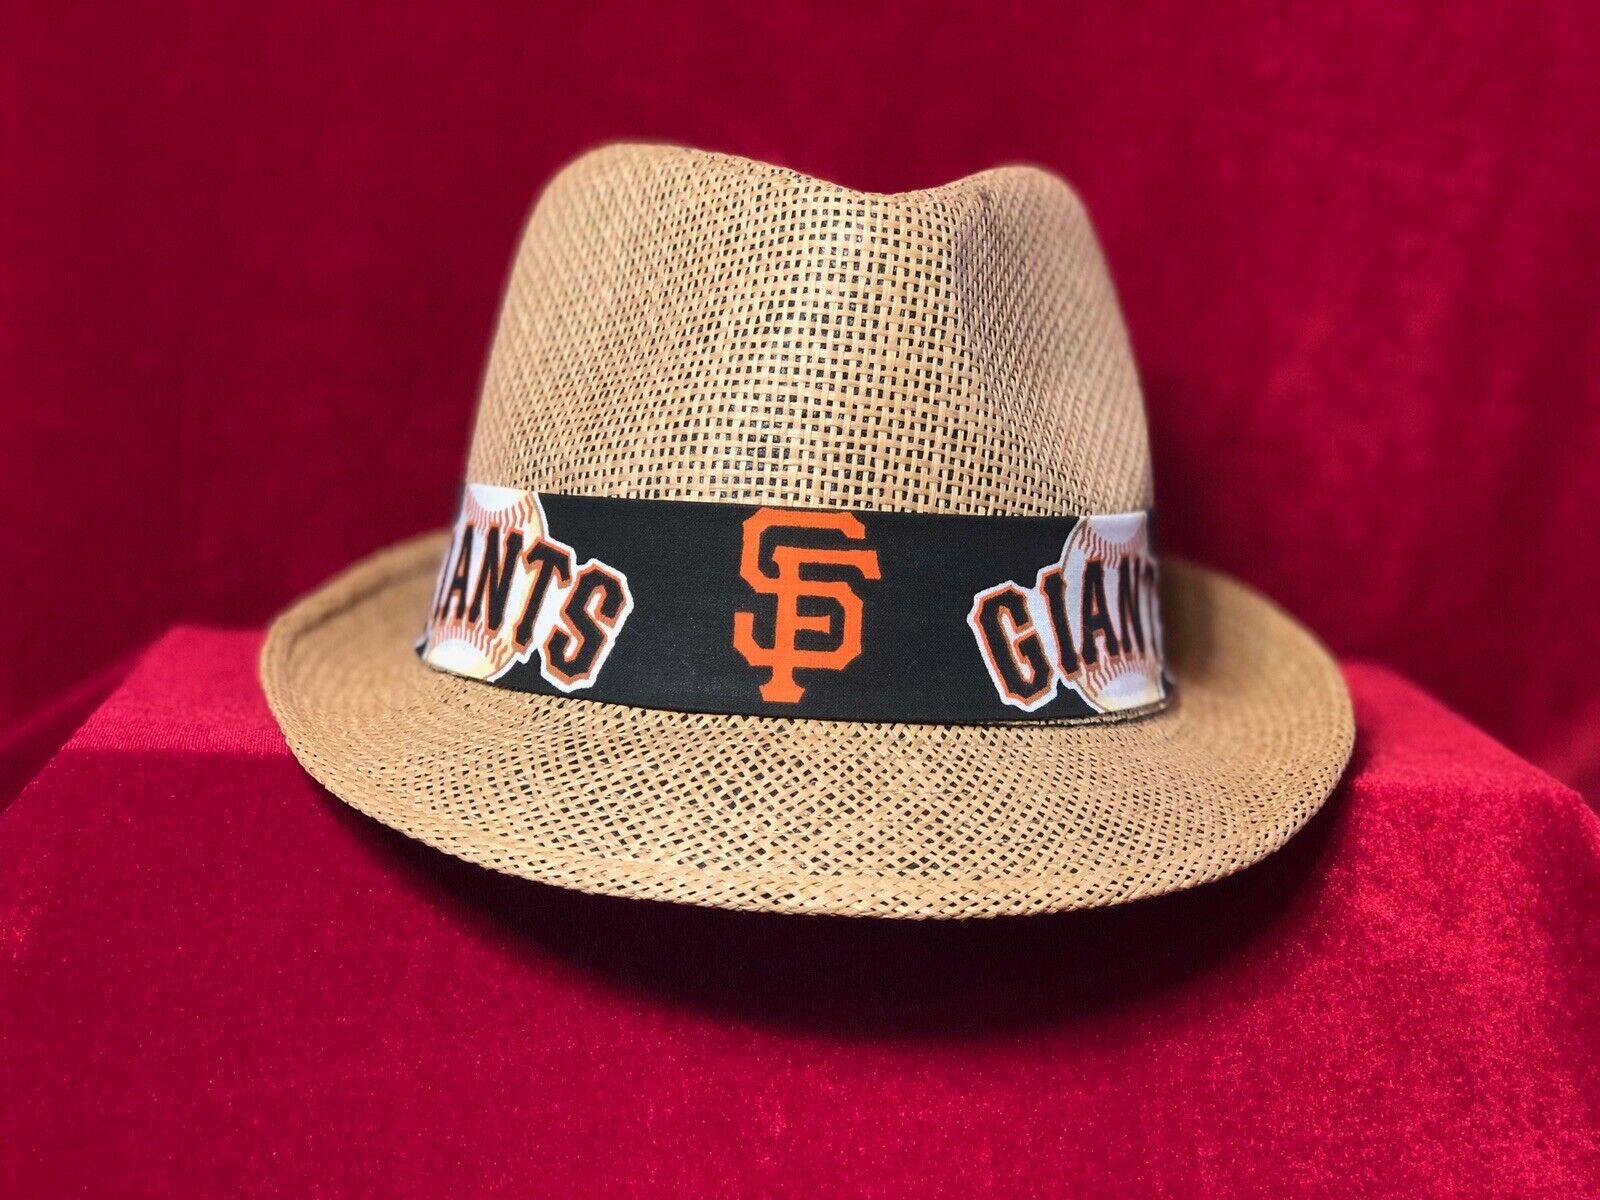 S.F. Giants Unisex Summer Fedora Panama Straw Hat with Band (Ship in a box)